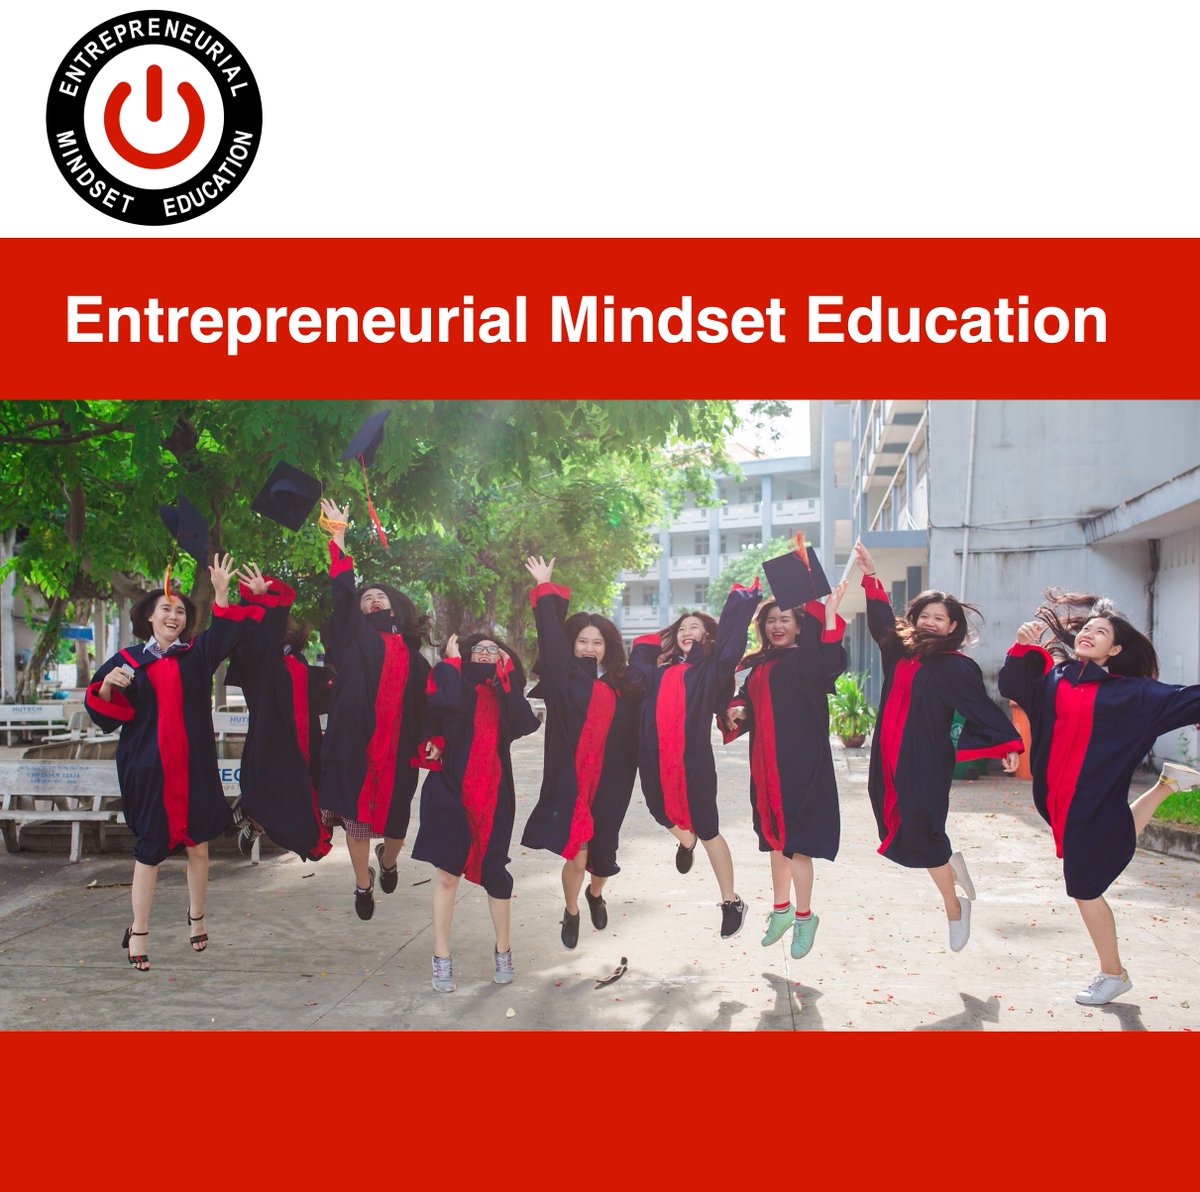 We are an international community of practice for the entrepreneurial mindset in education, with members representing 284 Higher Education Institutions in 82 countries. You are welcome to join us... entrepreneurial-mindset.education